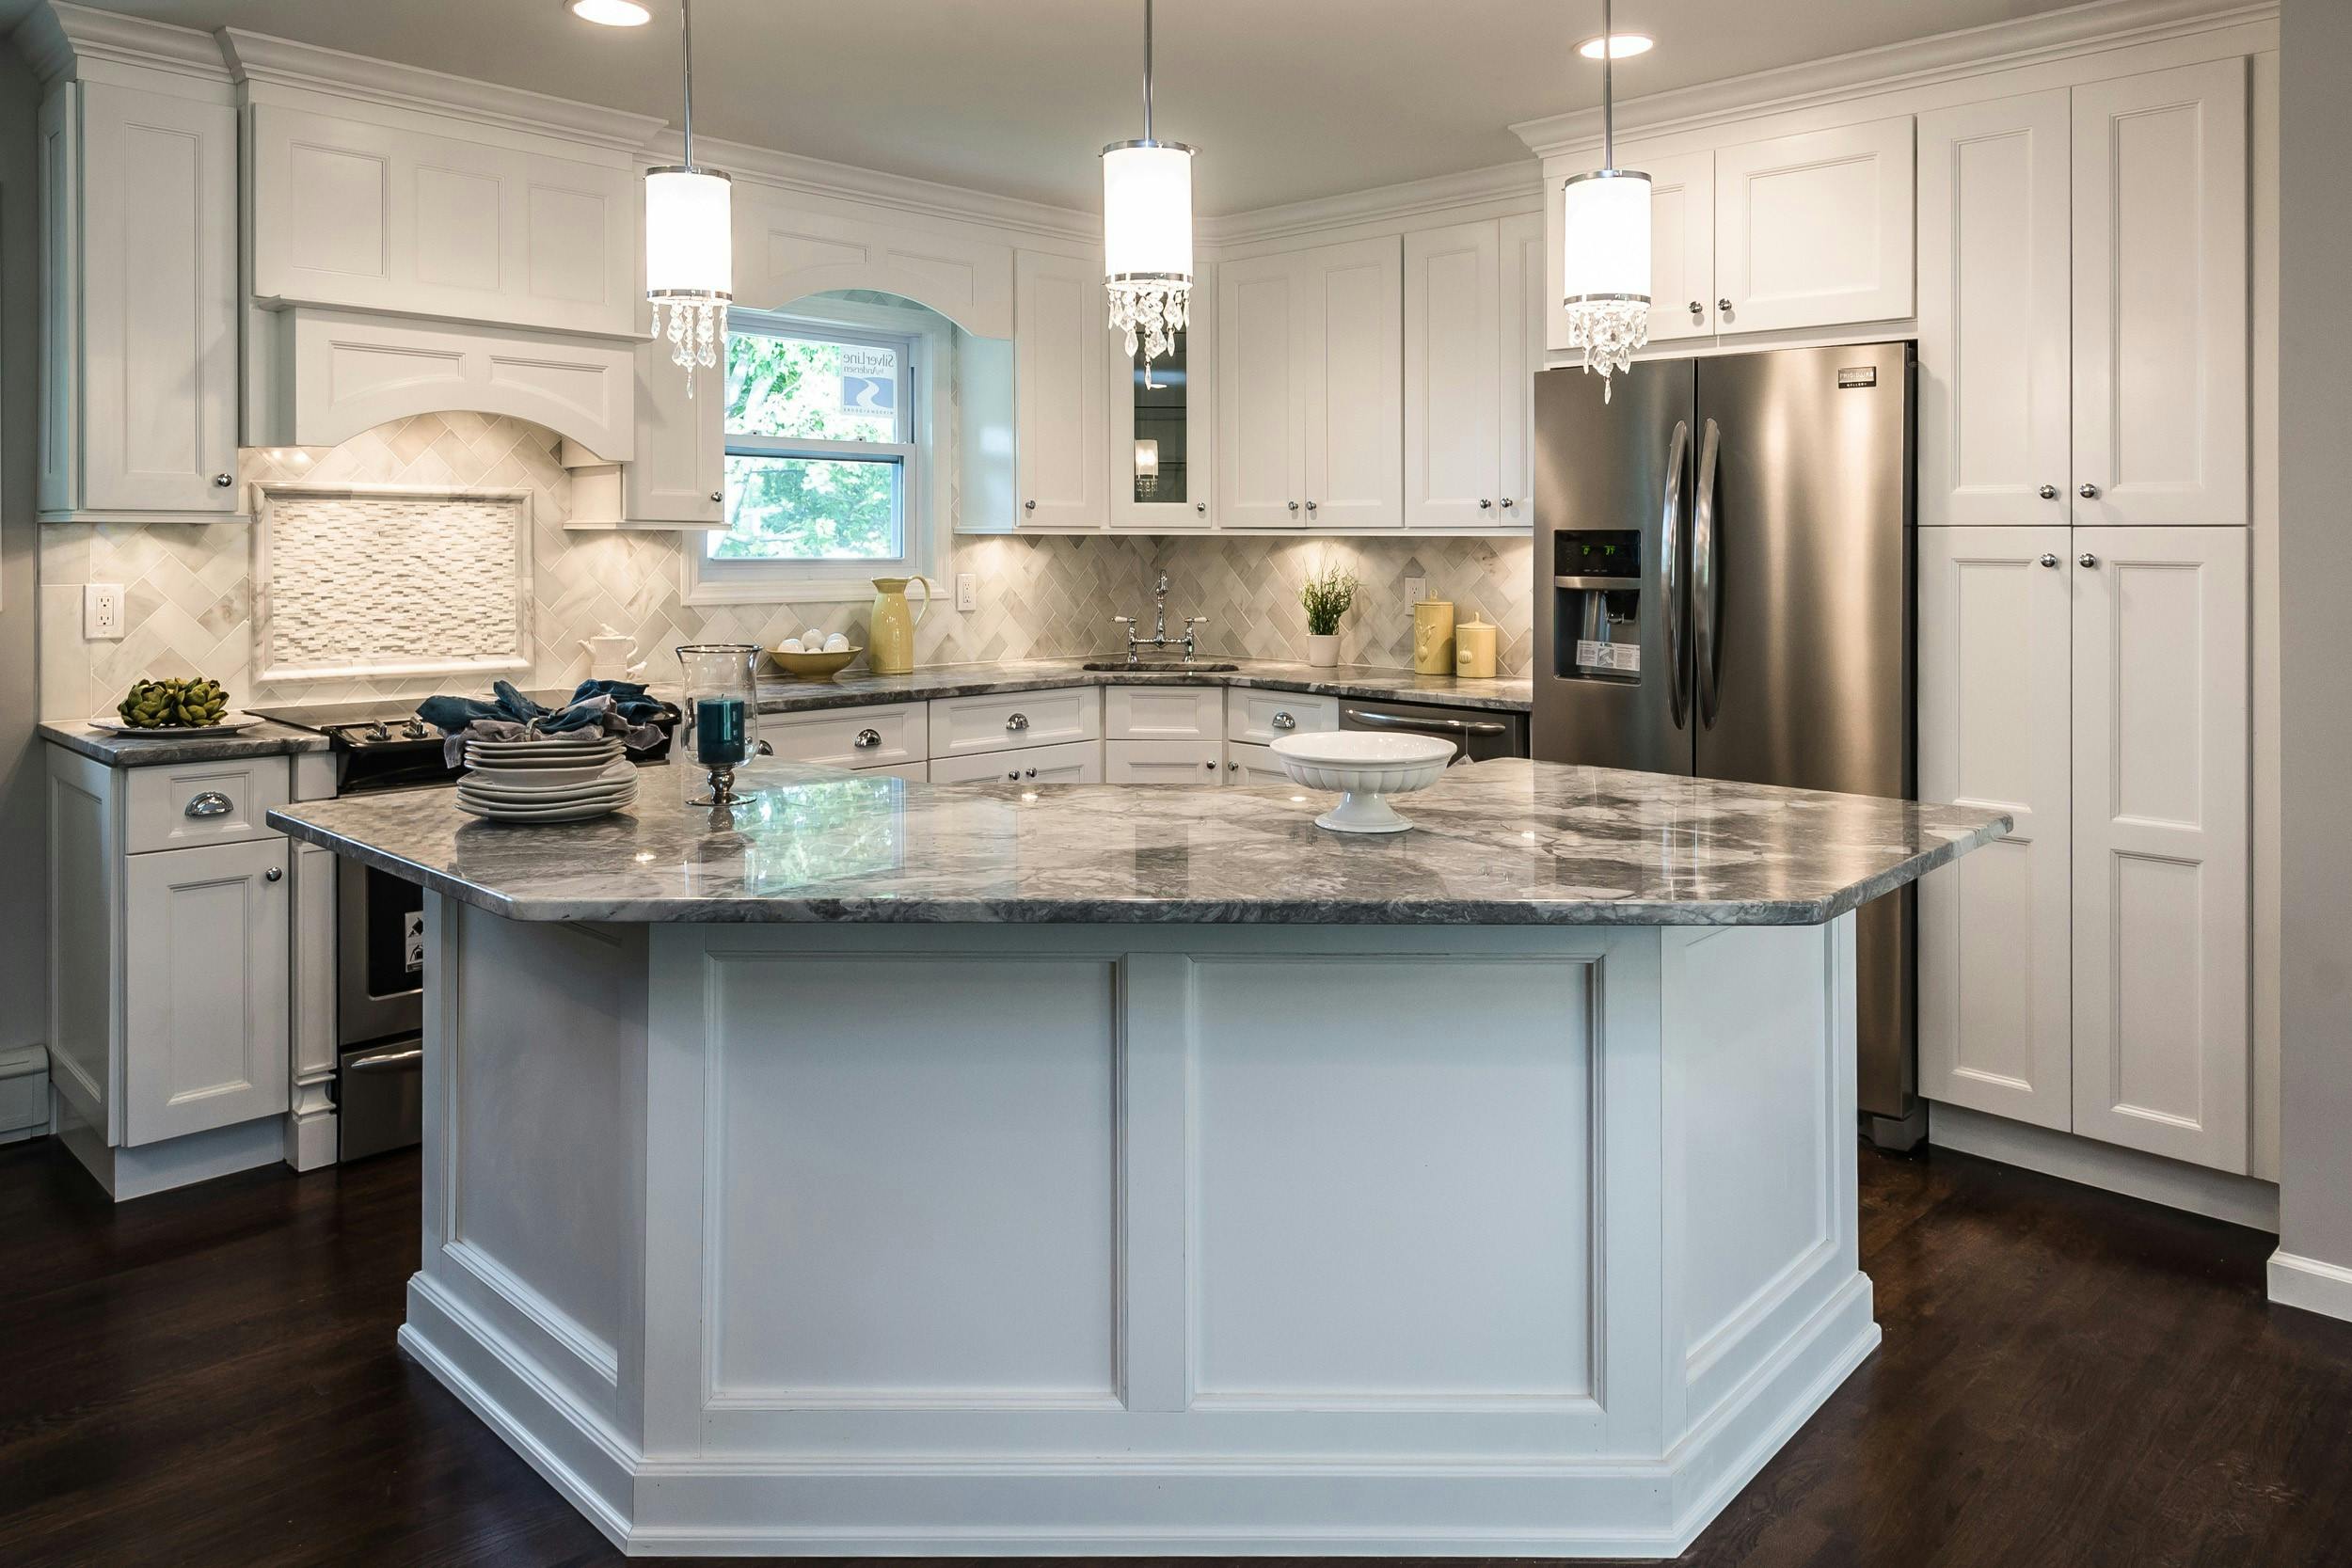 Kitchen Countertops And Cabinets, What Color Countertops Go Best With White Cabinets